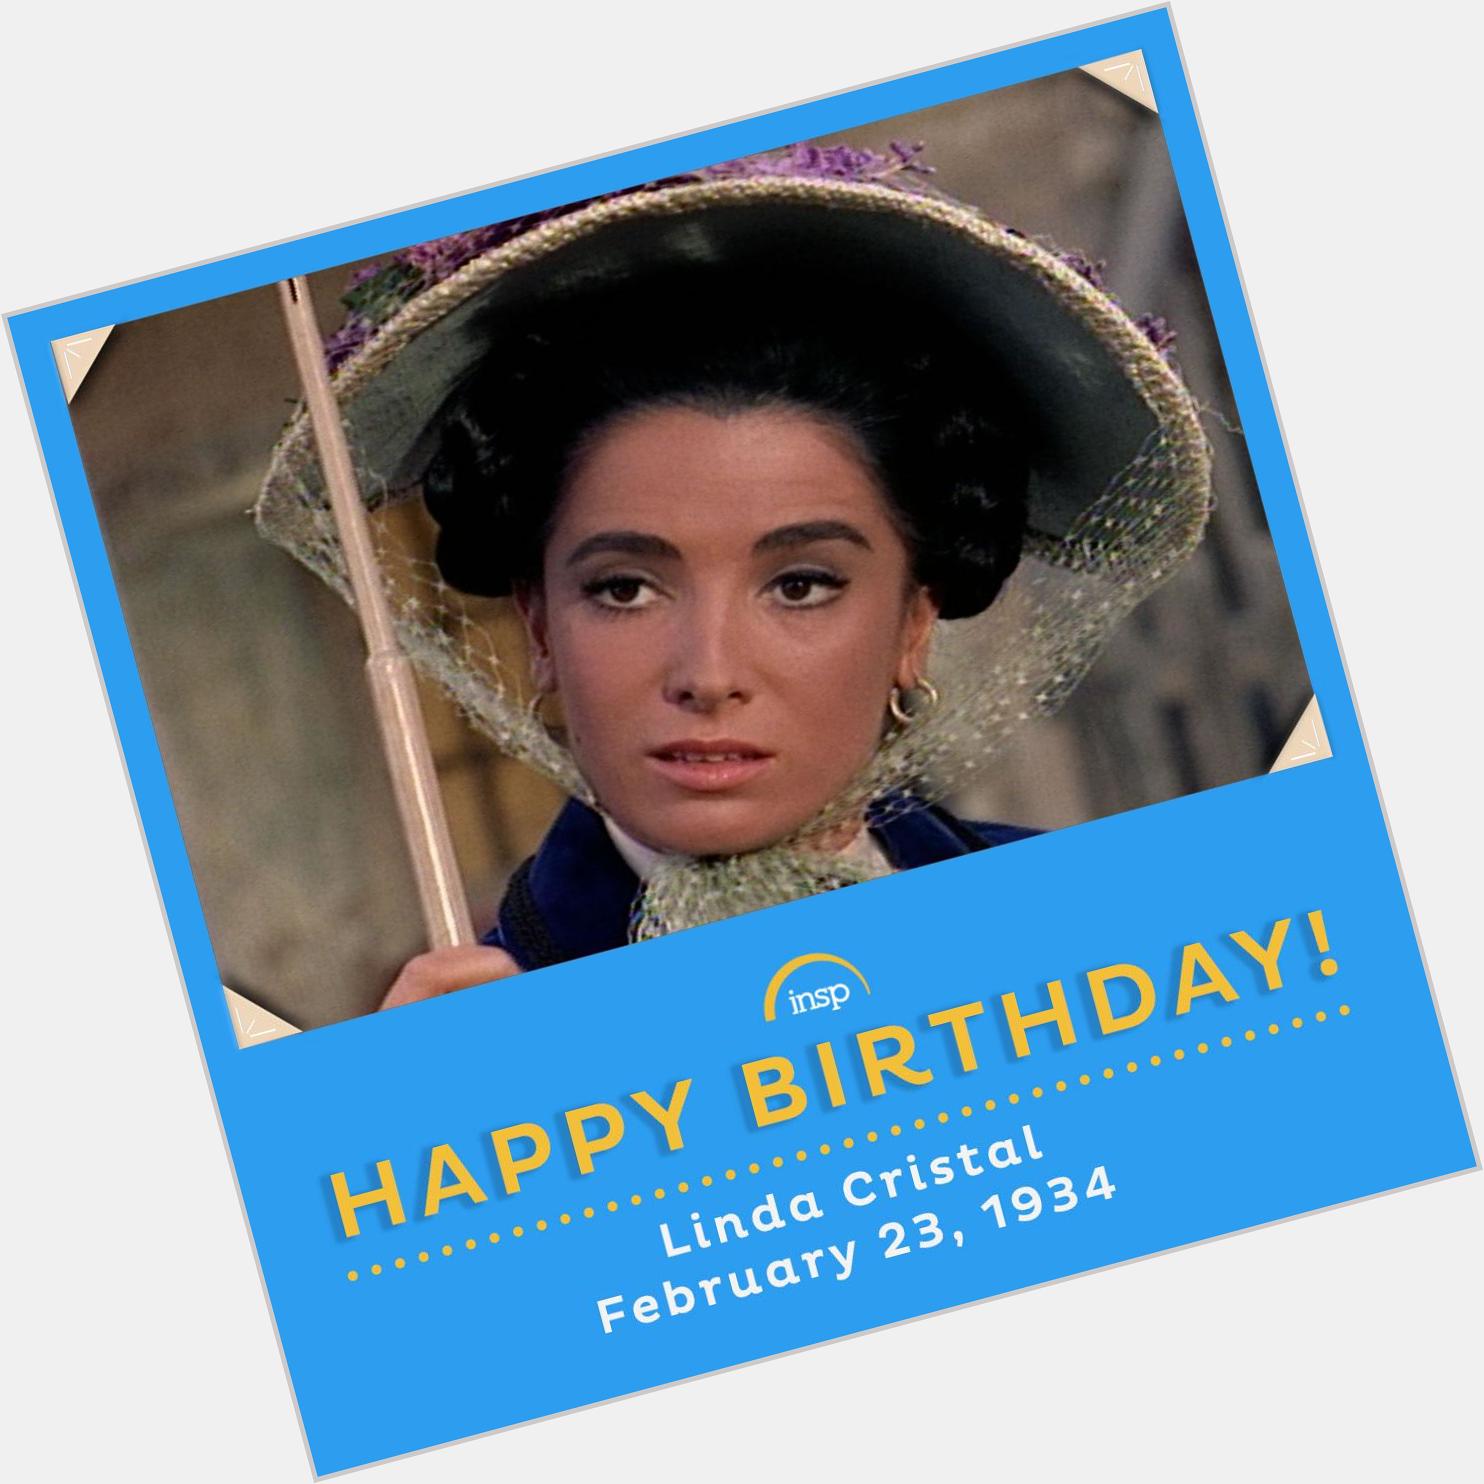 To wish the lovely Linda Cristal a very happy birthday! 